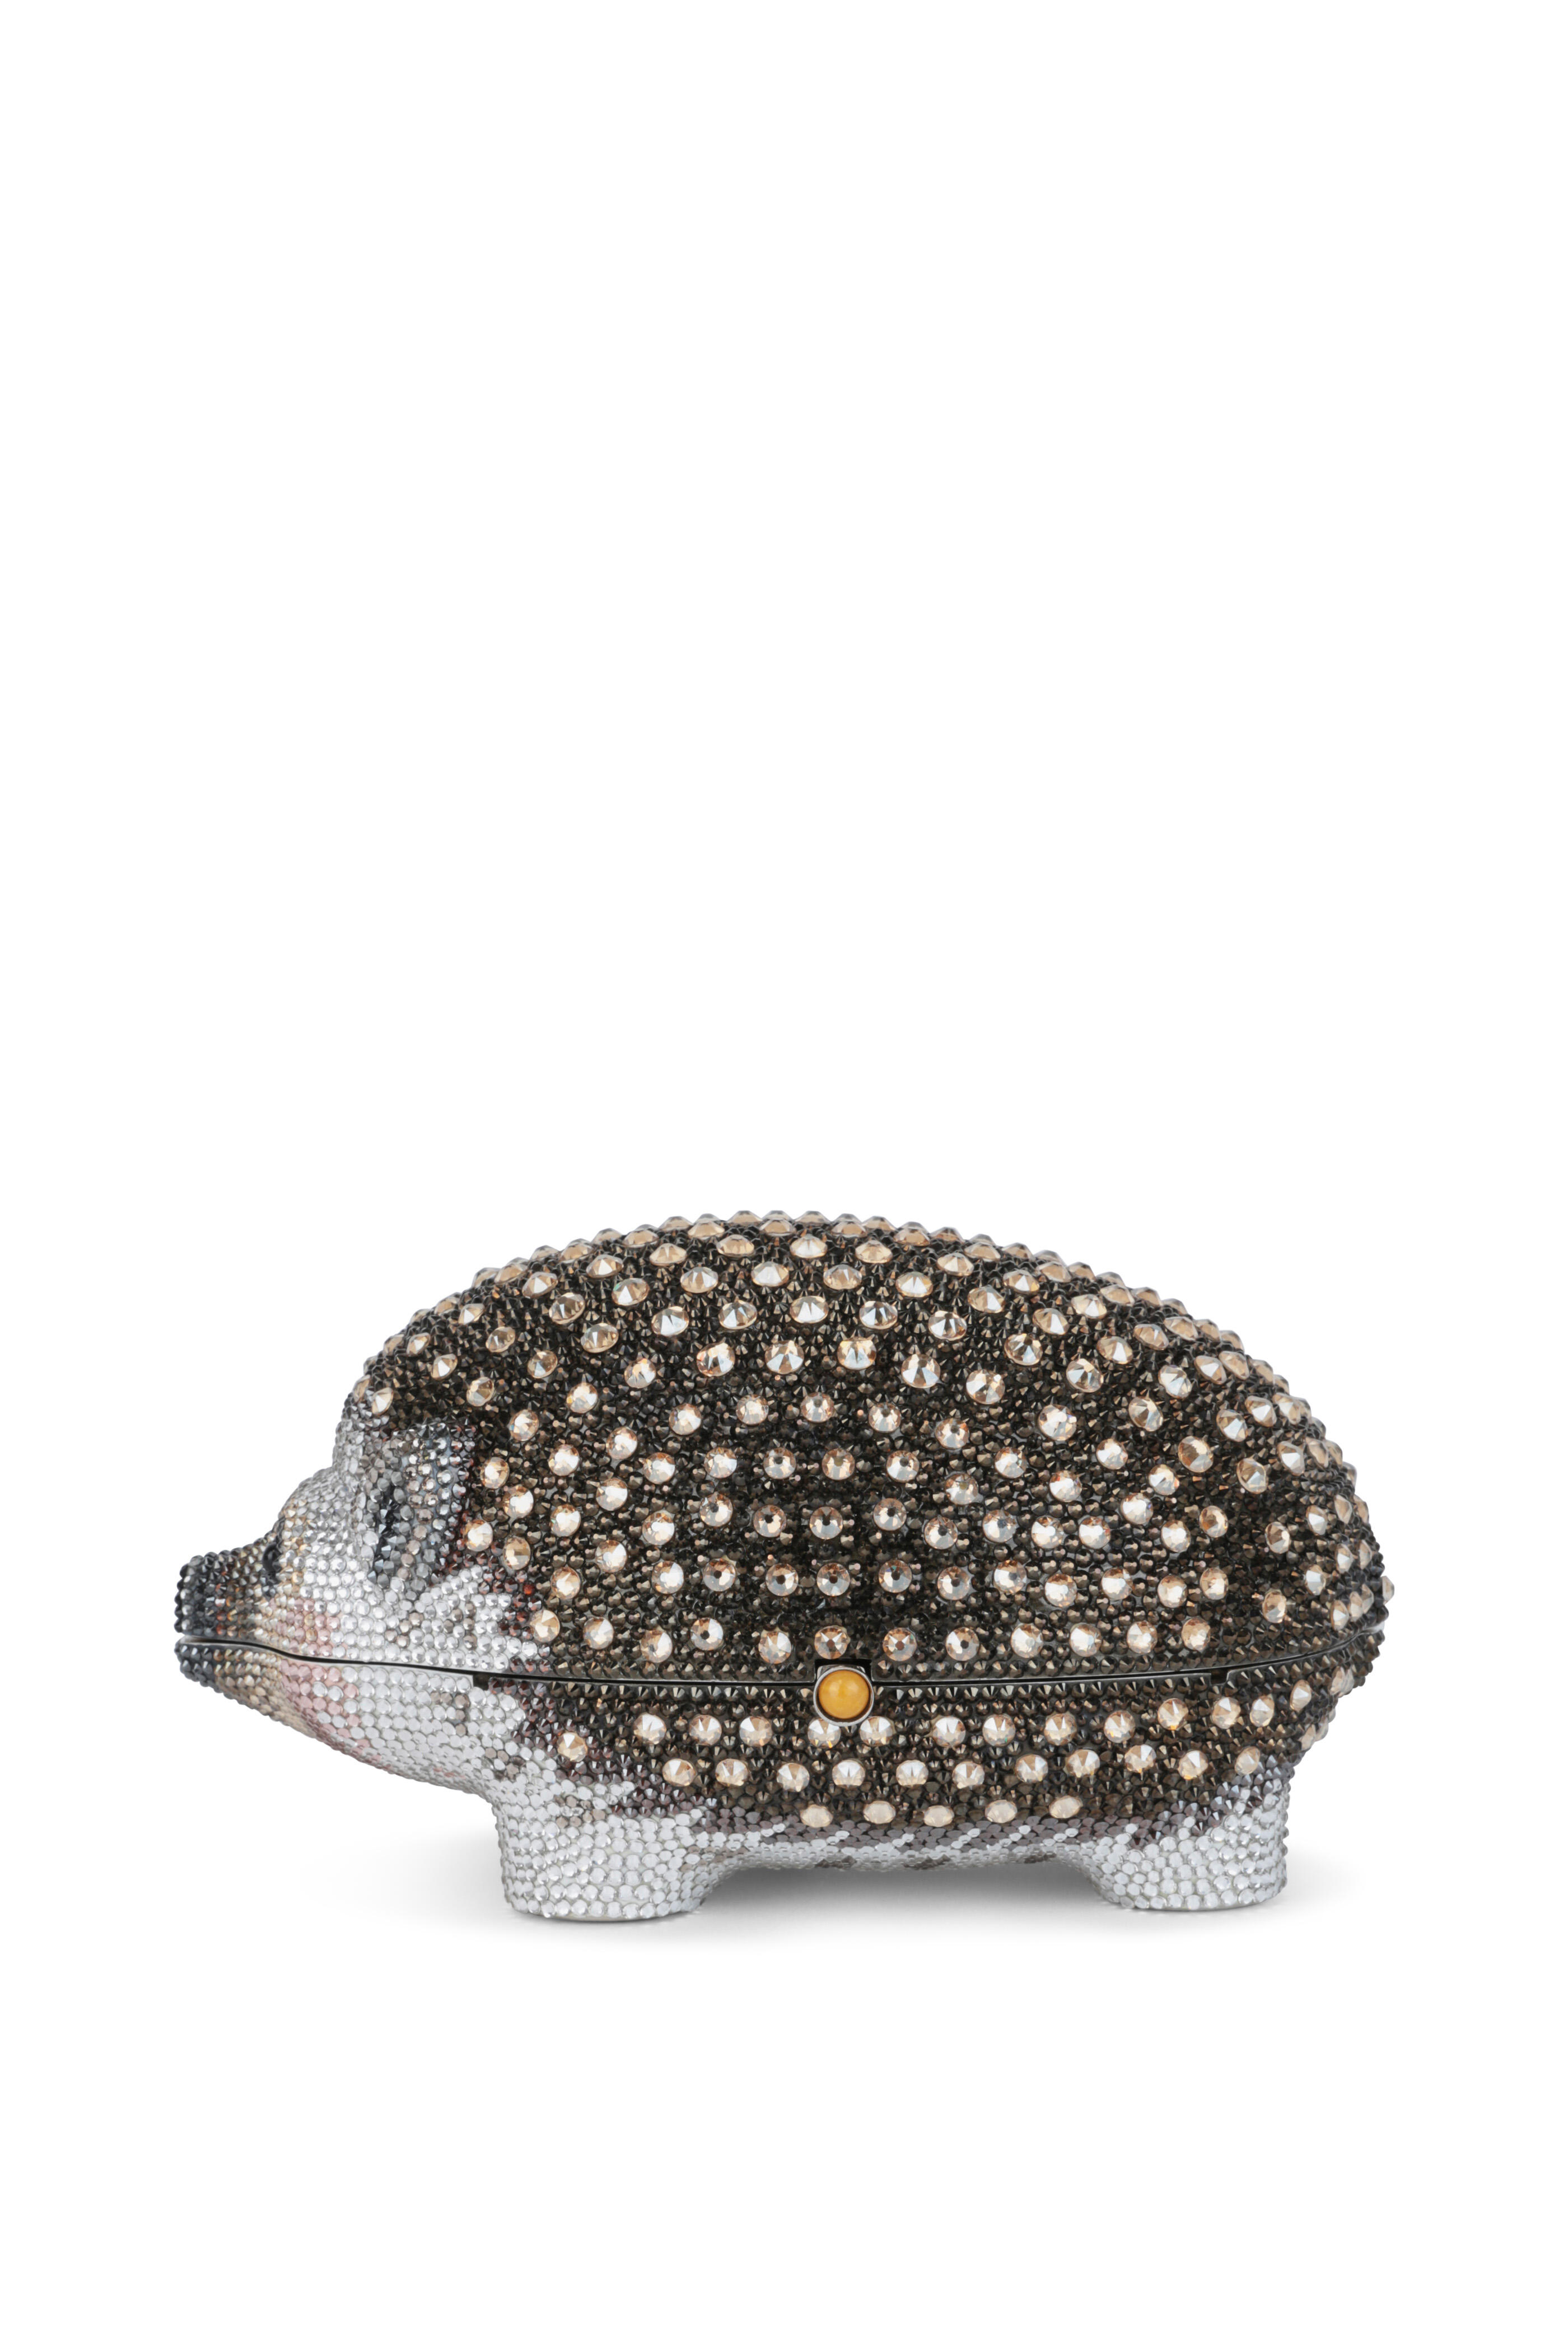 Judith Leiber Couture Women's Jet Full Bead Envelope Clutch | by Mitchell Stores